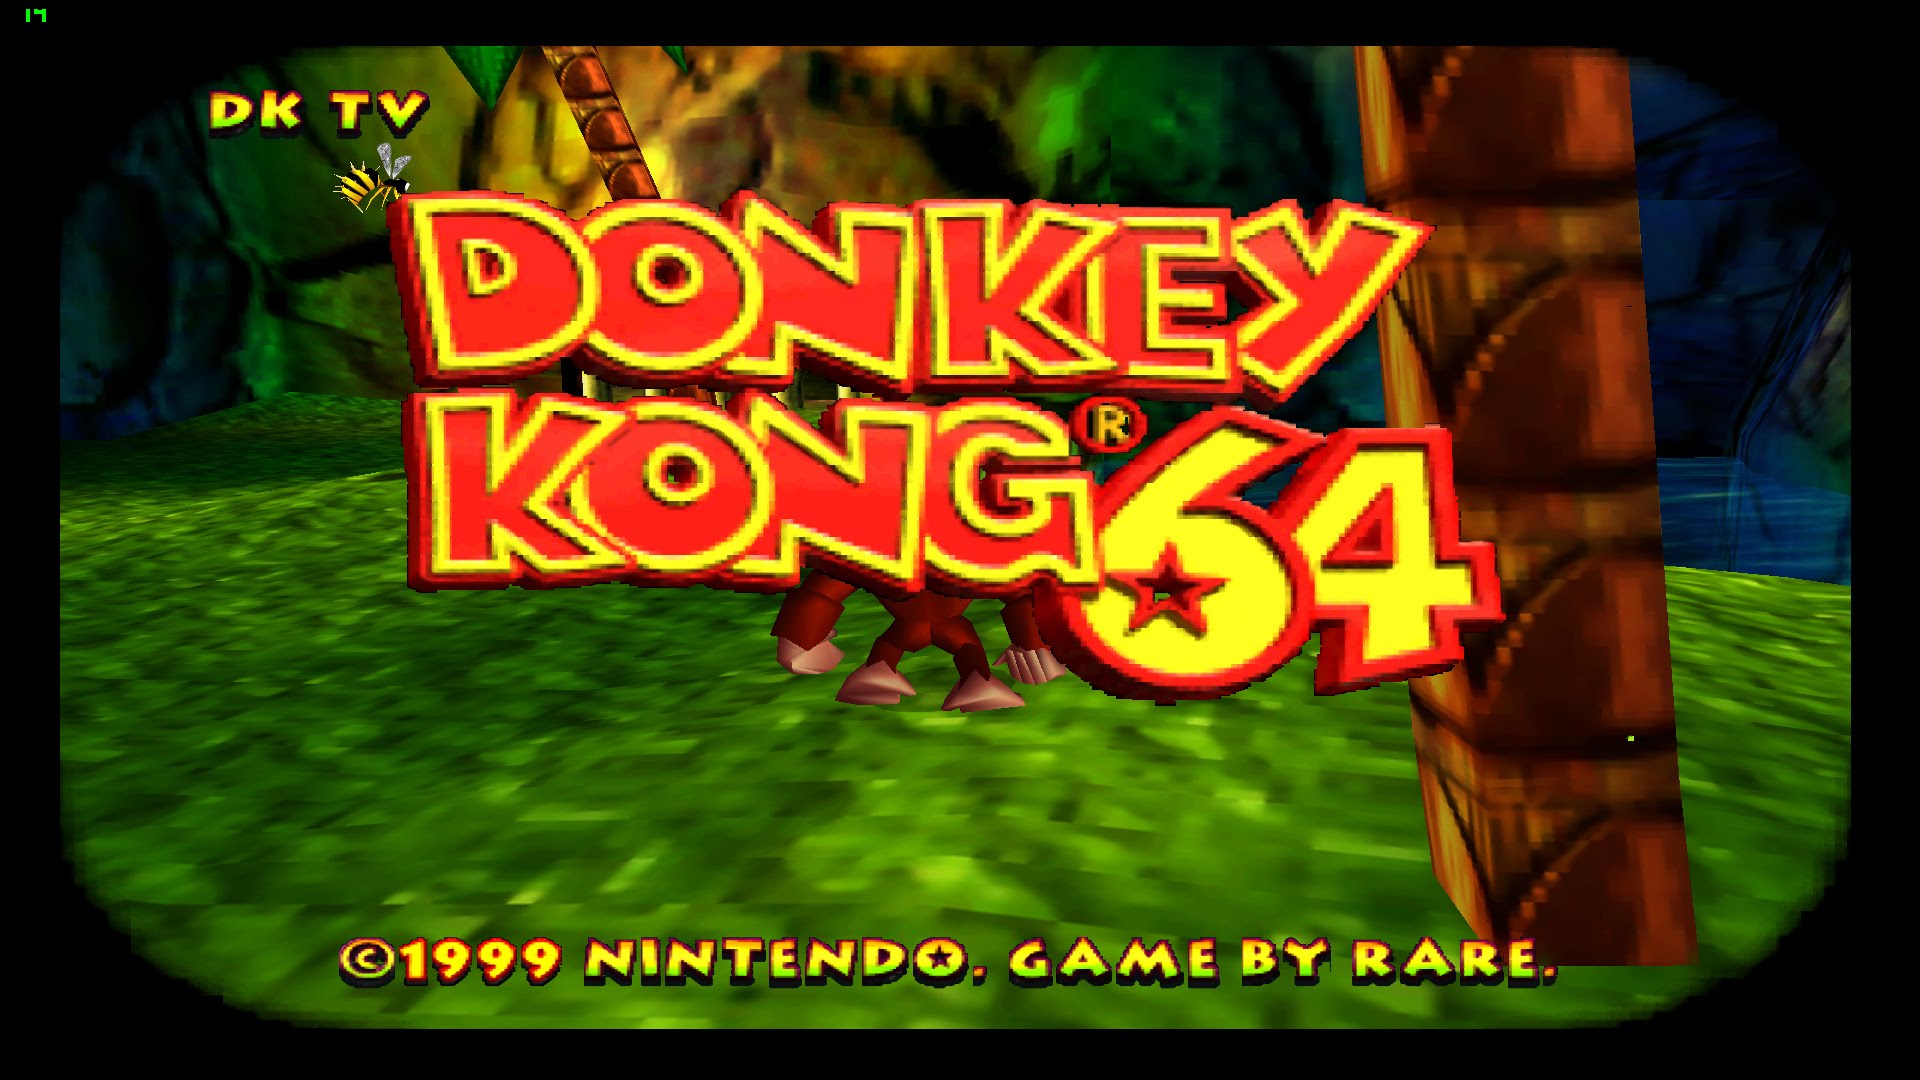 Nintendo is reportedly working on a new Donkey Kong game for the